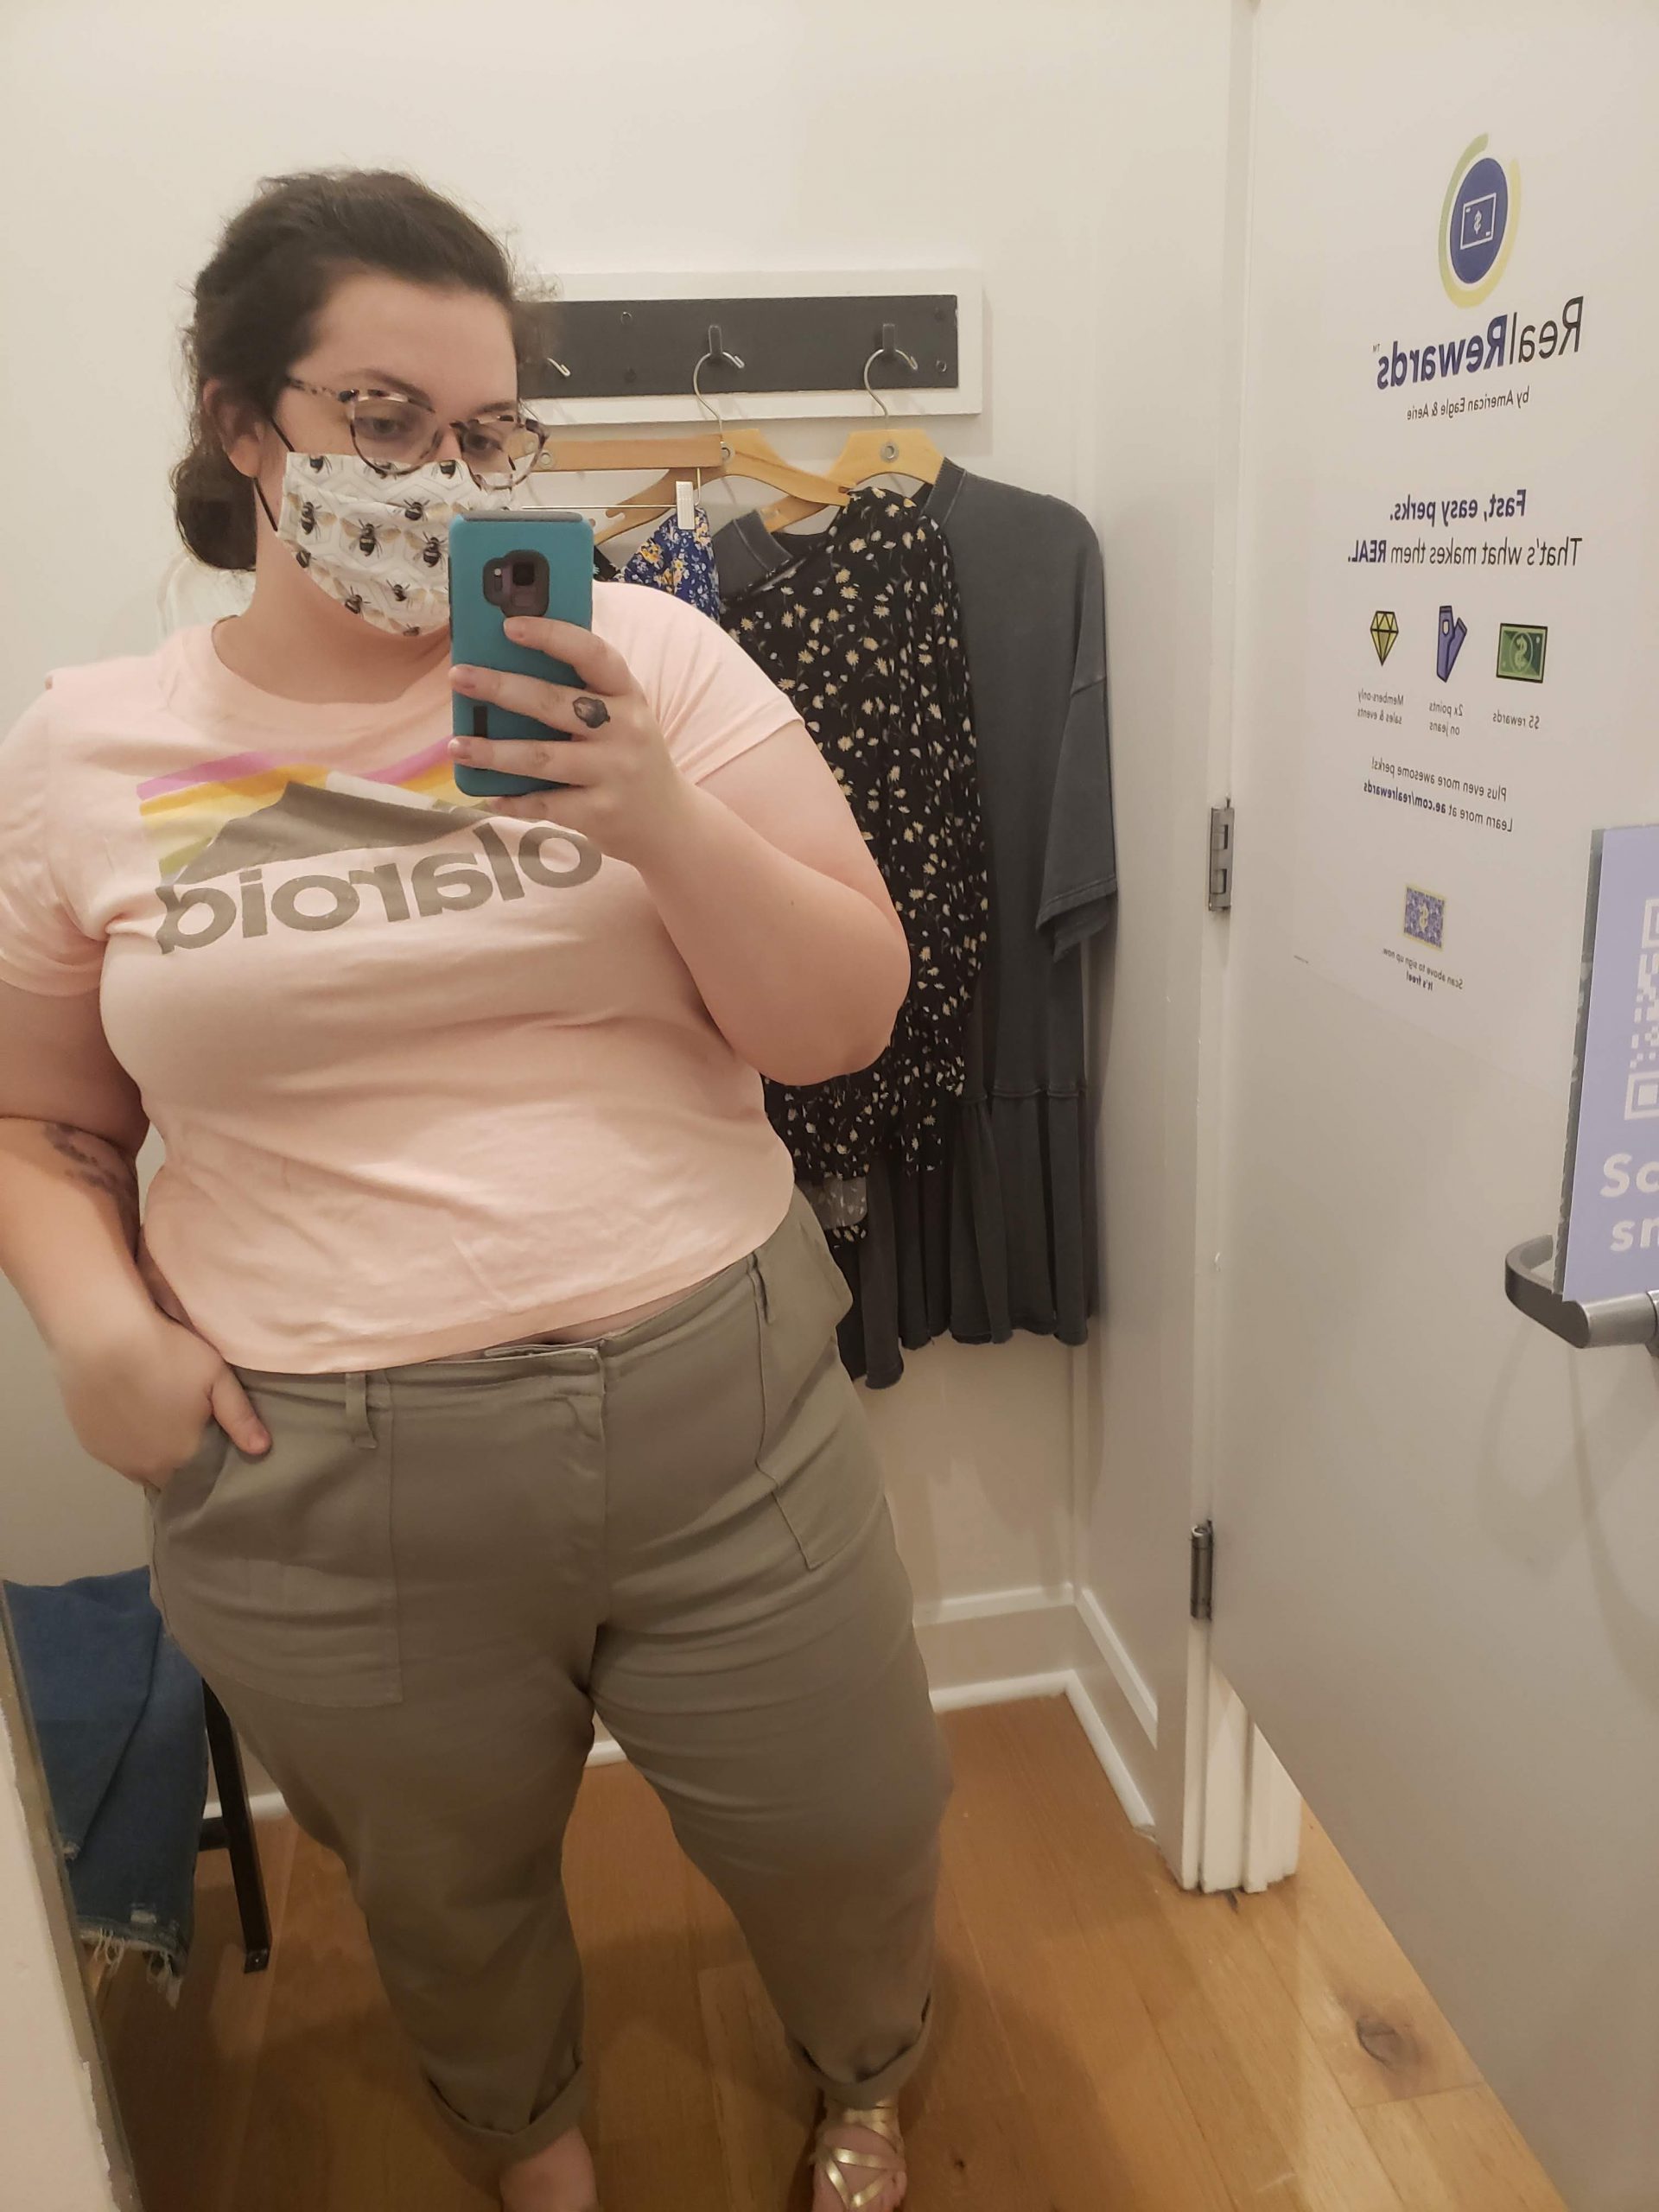 Old Navy to scale back inclusive sizing in stores, less than a